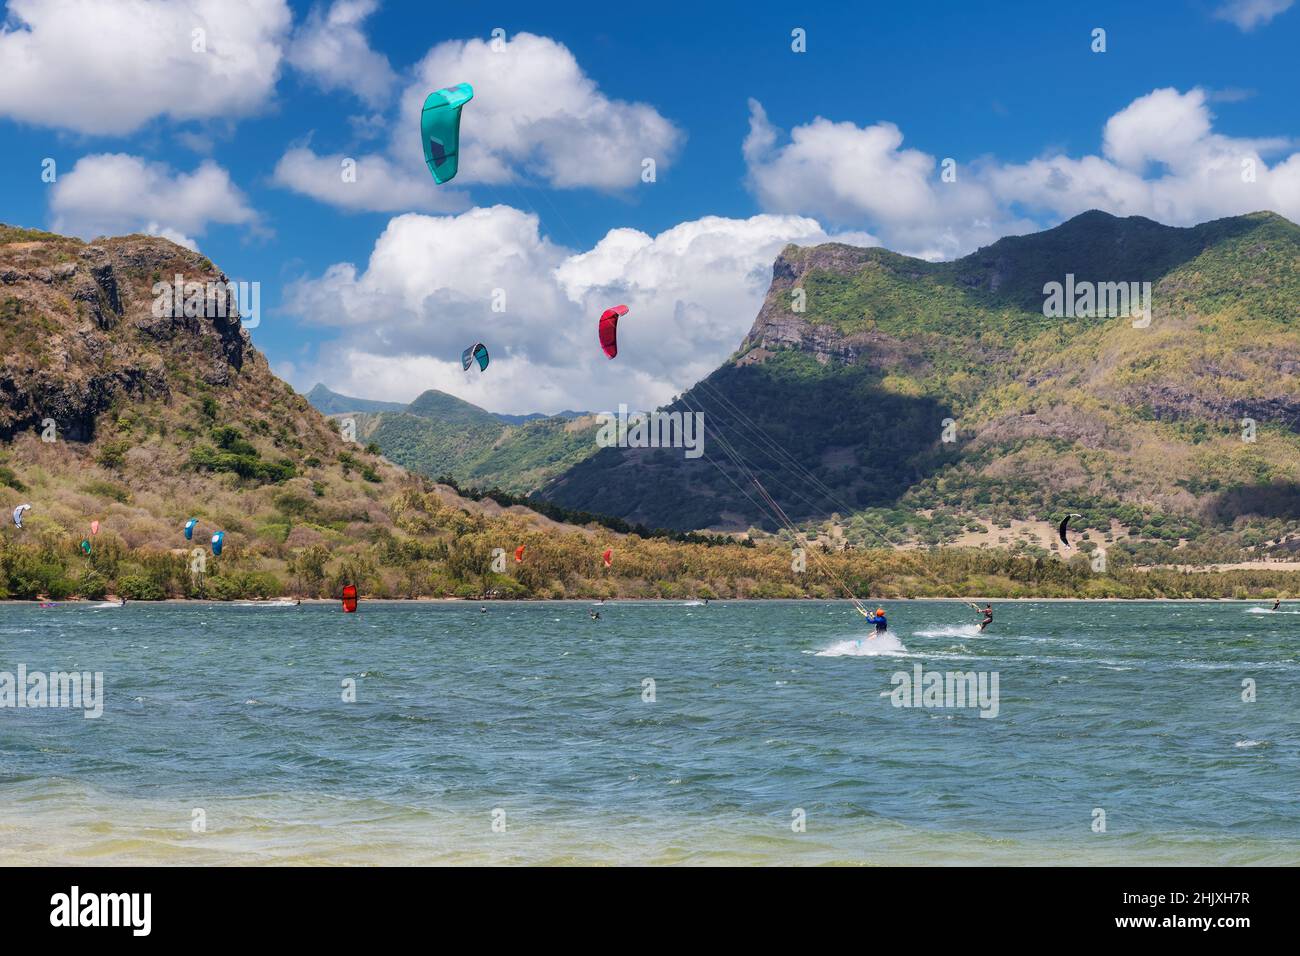 Kite surfing in the clear waters of the Indian Ocean in Le Morne beach, Mauritius. Stock Photo